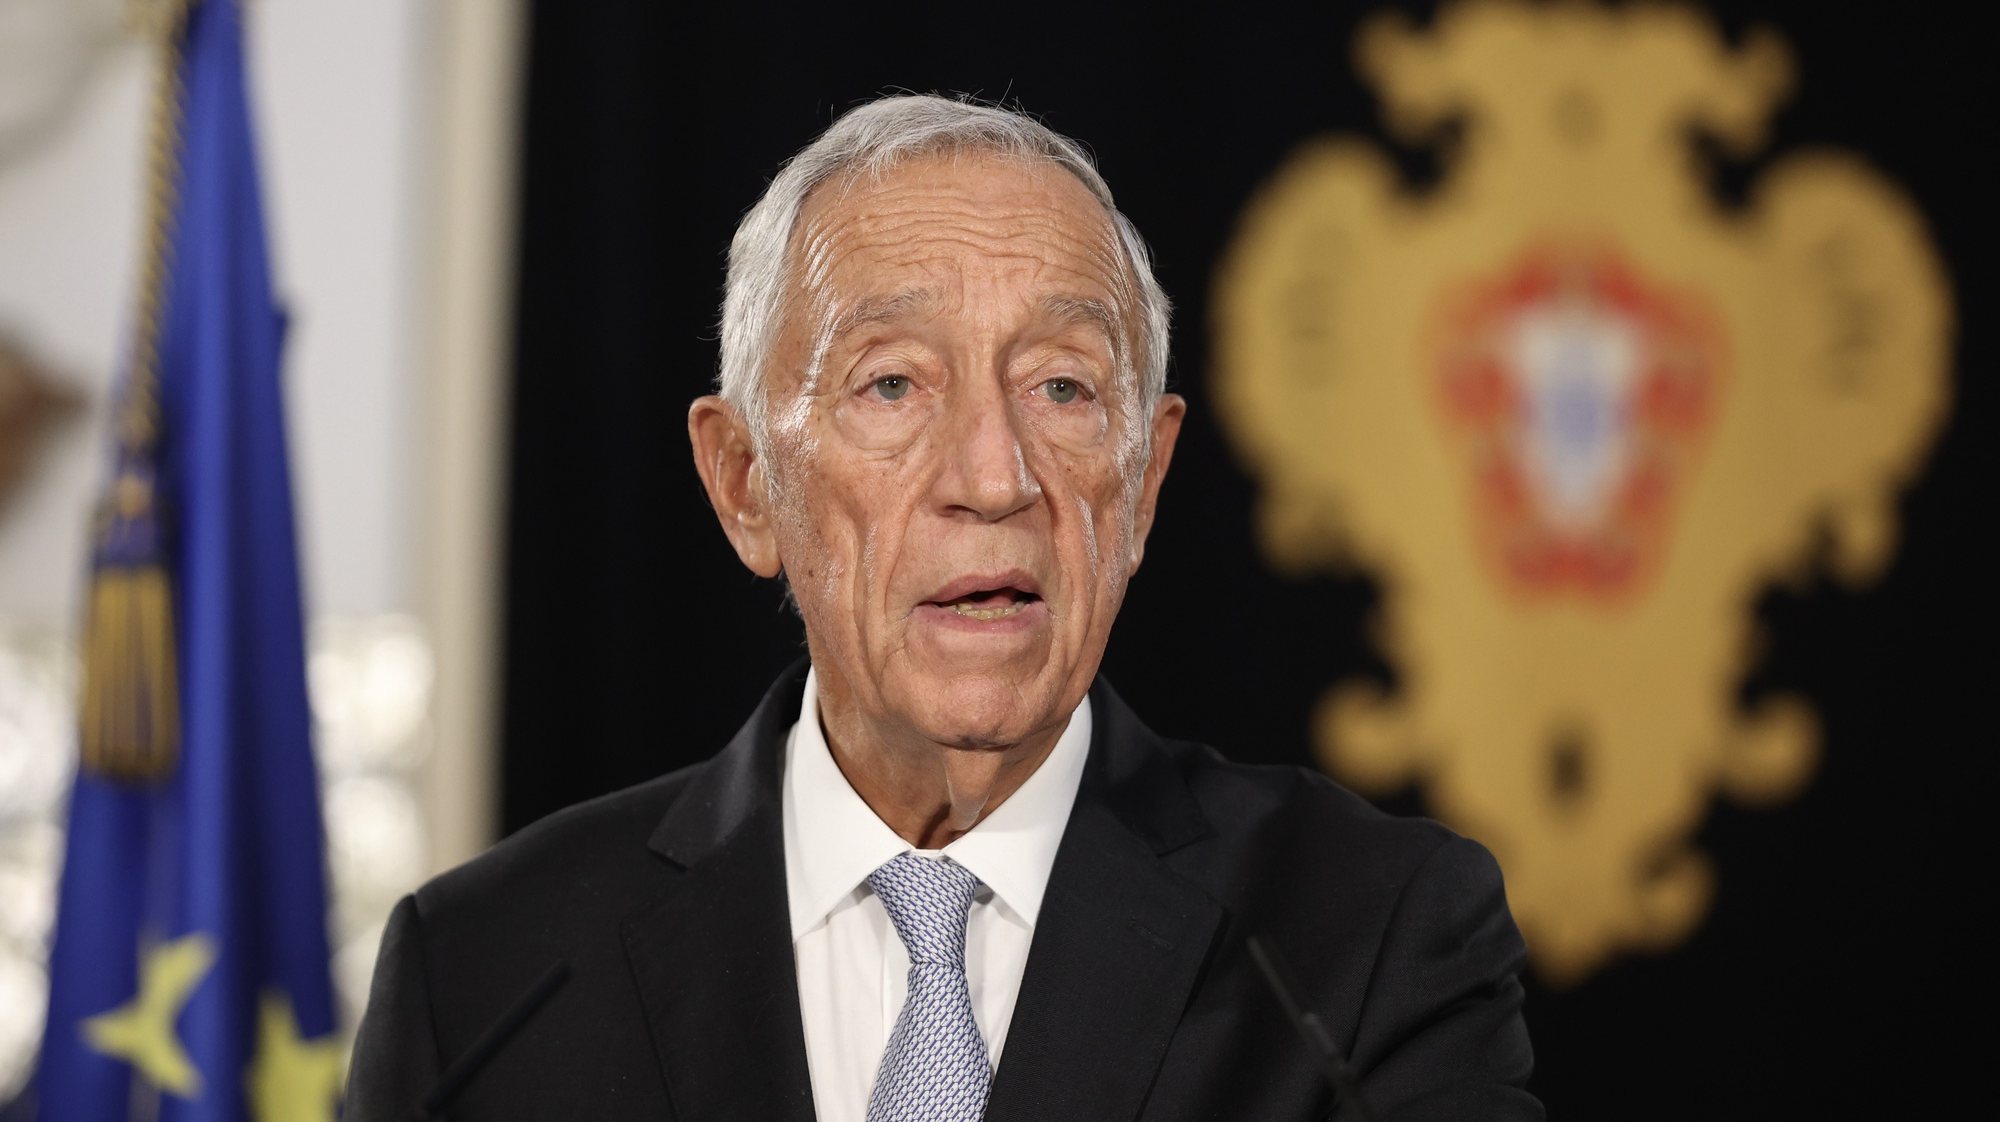 epa10967298 Portuguese President Marcelo Rebelo de Sousa, during a statement to the nation in which he decided to convoke new elections for March 2024 after a meeting of the Council of State, Belem Palace in Lisbon, Portugal, 09 November 2023. Prime Minister António Costa tendered his resignation on 07 November, which the head of state accepted, after several government offices were raided as part of investigations into lithium and hydrogen projects and the Public Prosecutor&#039;s Office announced that he is the subject of an autonomous enquiry at the Supreme Court of Justice.  EPA/CARLOS M. ALMEIDA